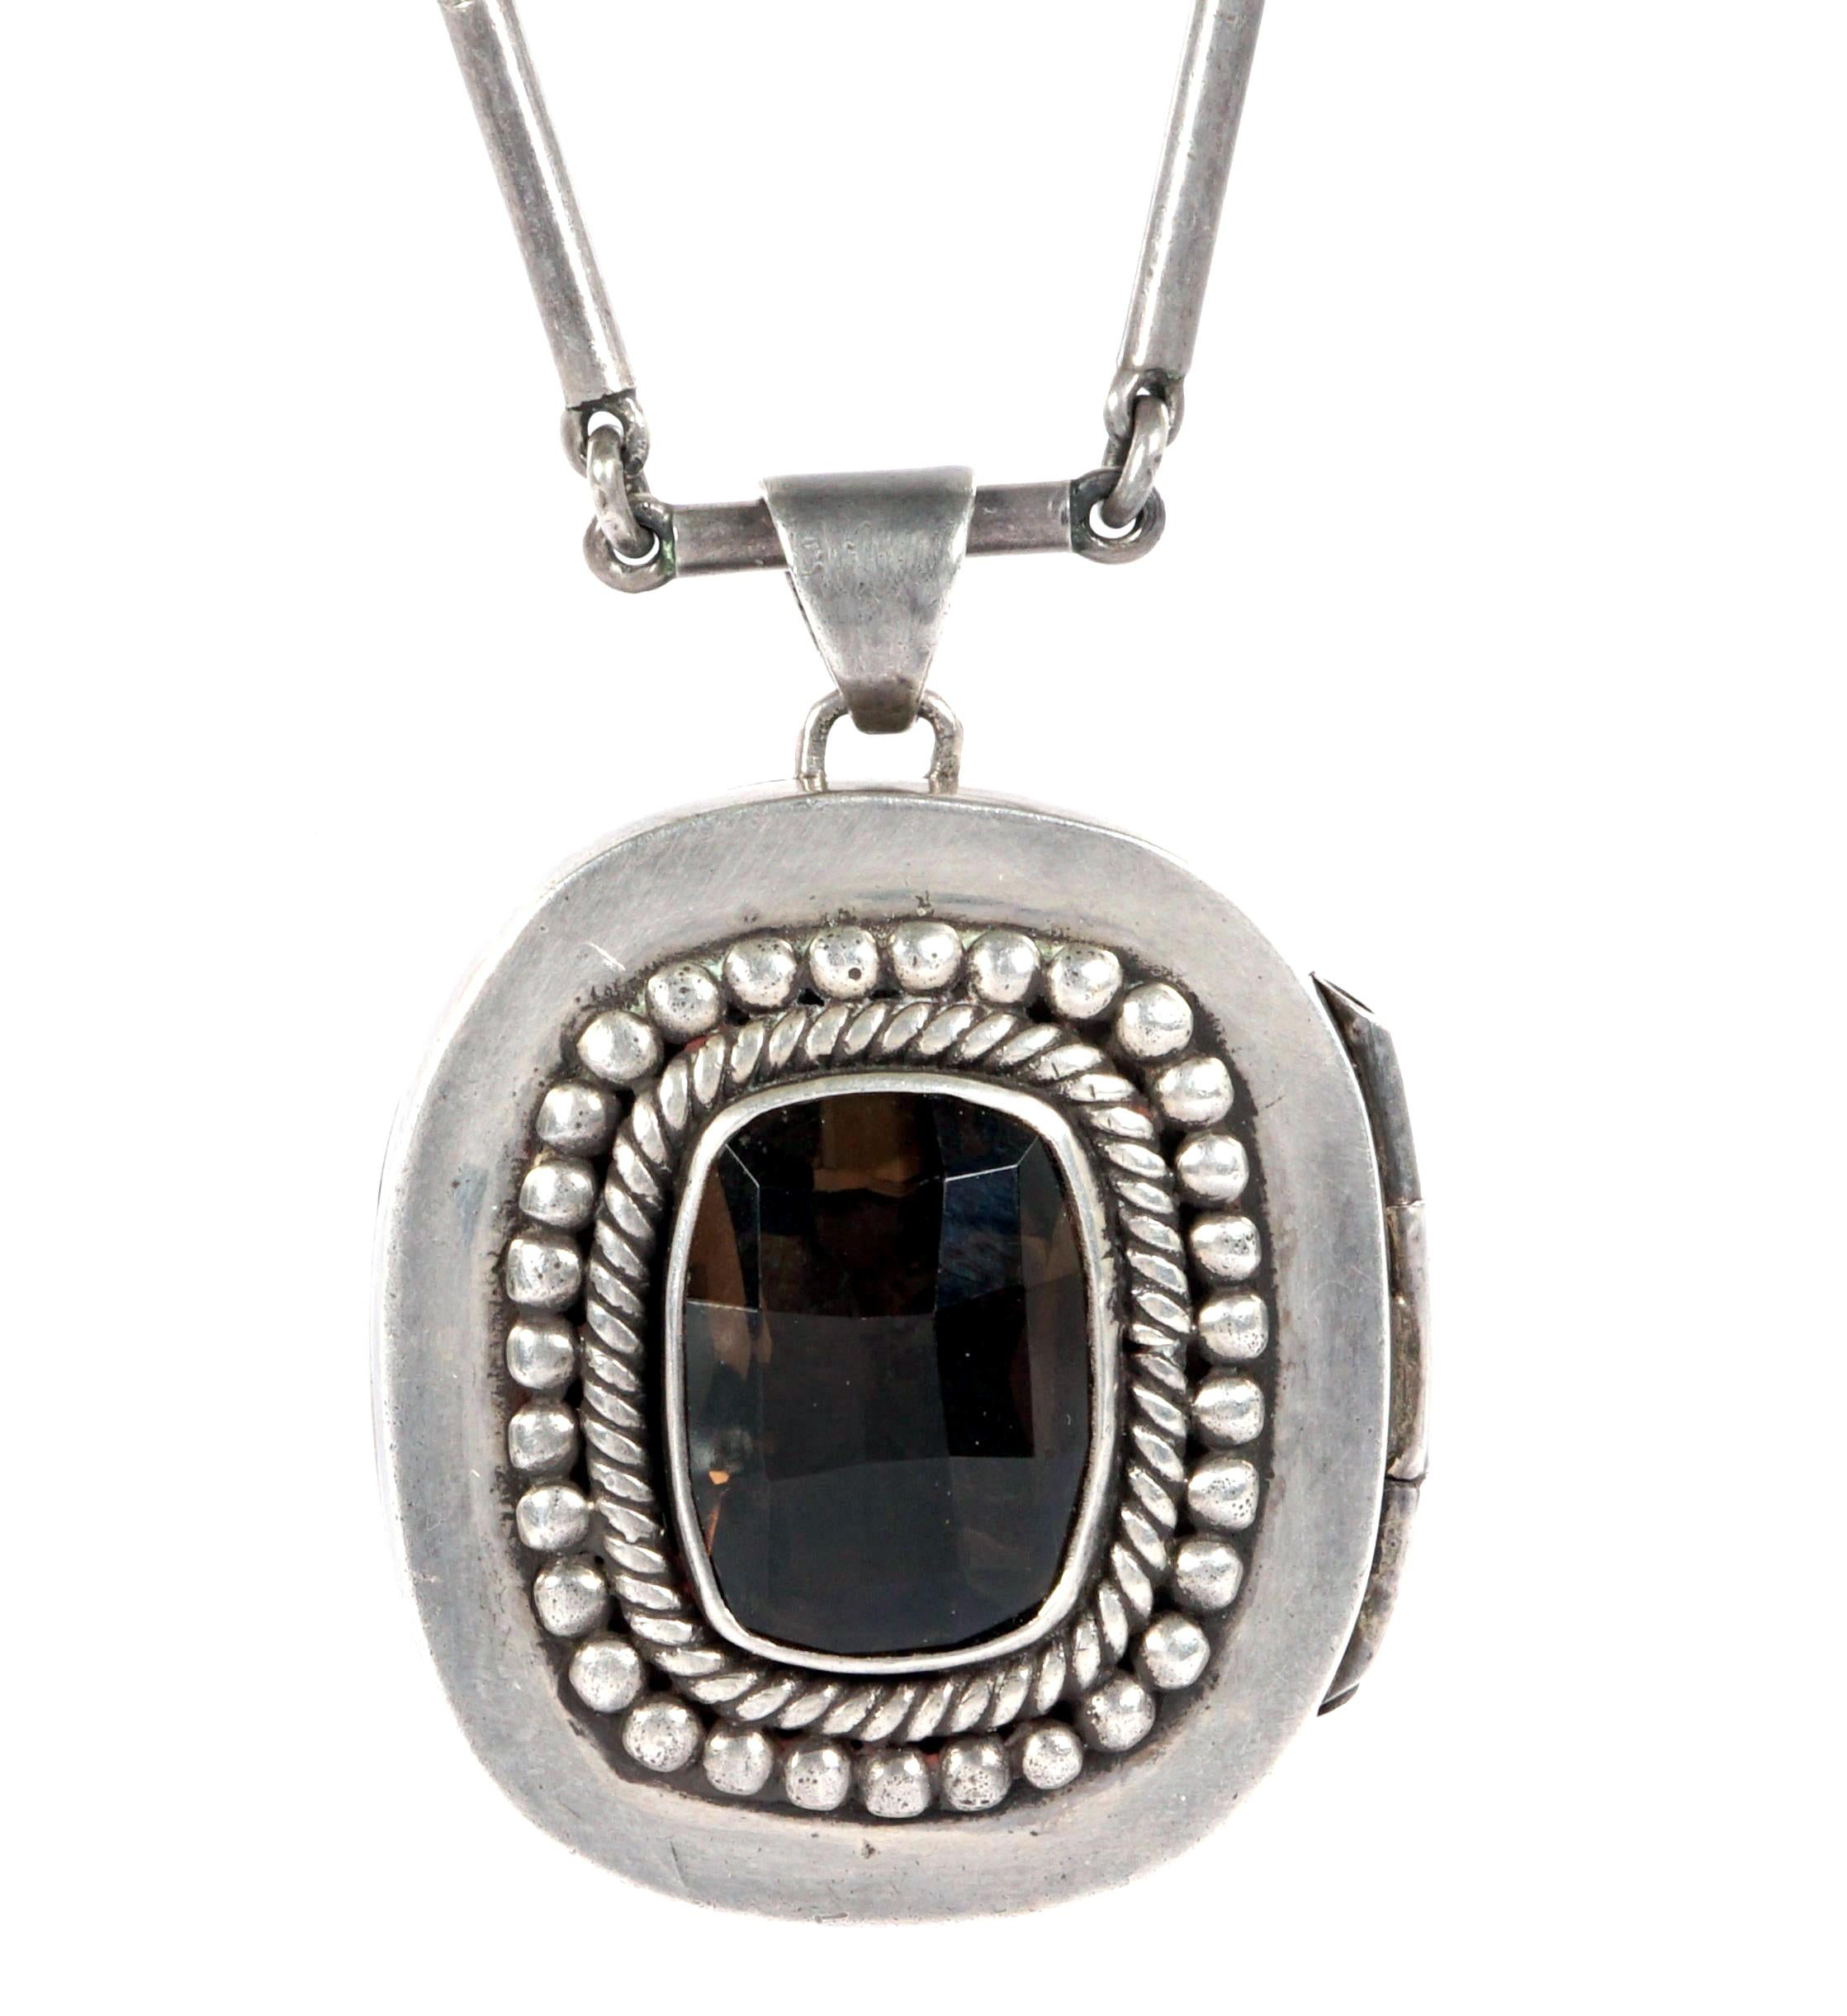 A beautiful Mexican sterling silver necklace made by Taxco silversmith Antonio Pineda post 1956. The articulated chain links carries a locket pendant with a smoky quartz cabochon. Fully marked inside of the locket with silver content of 0.97.